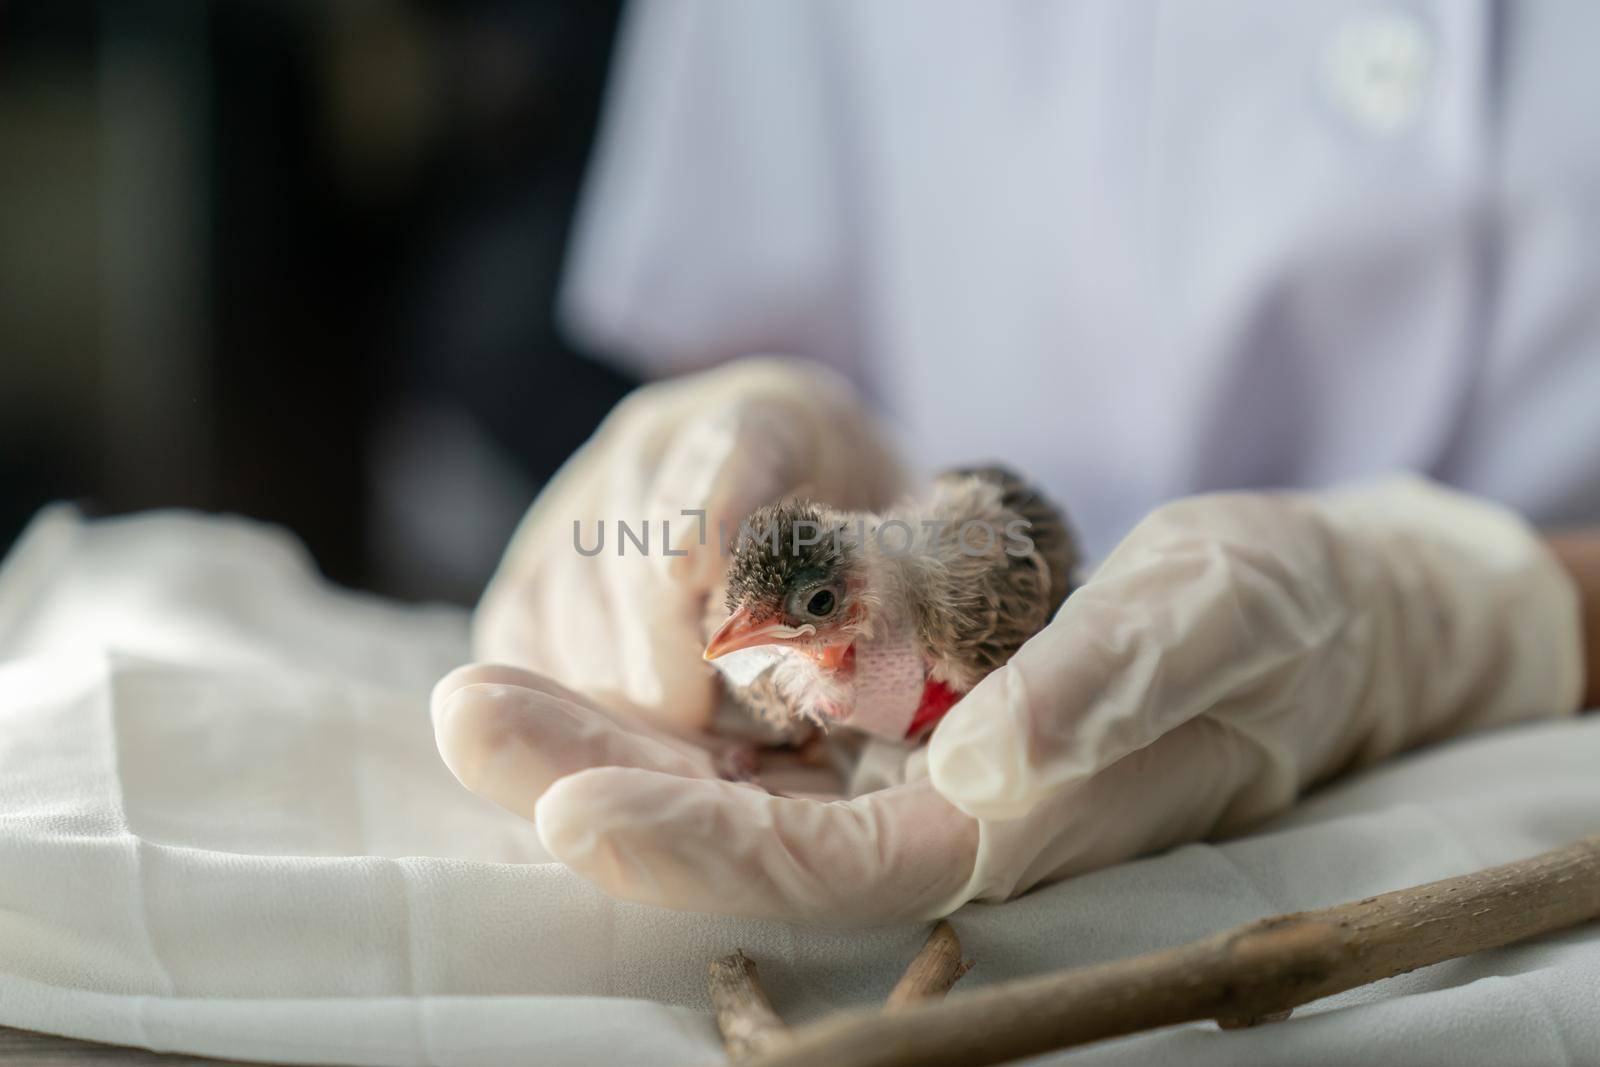 Close up of veterinarians hands in surgical gloves holding small bird, after attacked and injured by a cat. by sirawit99